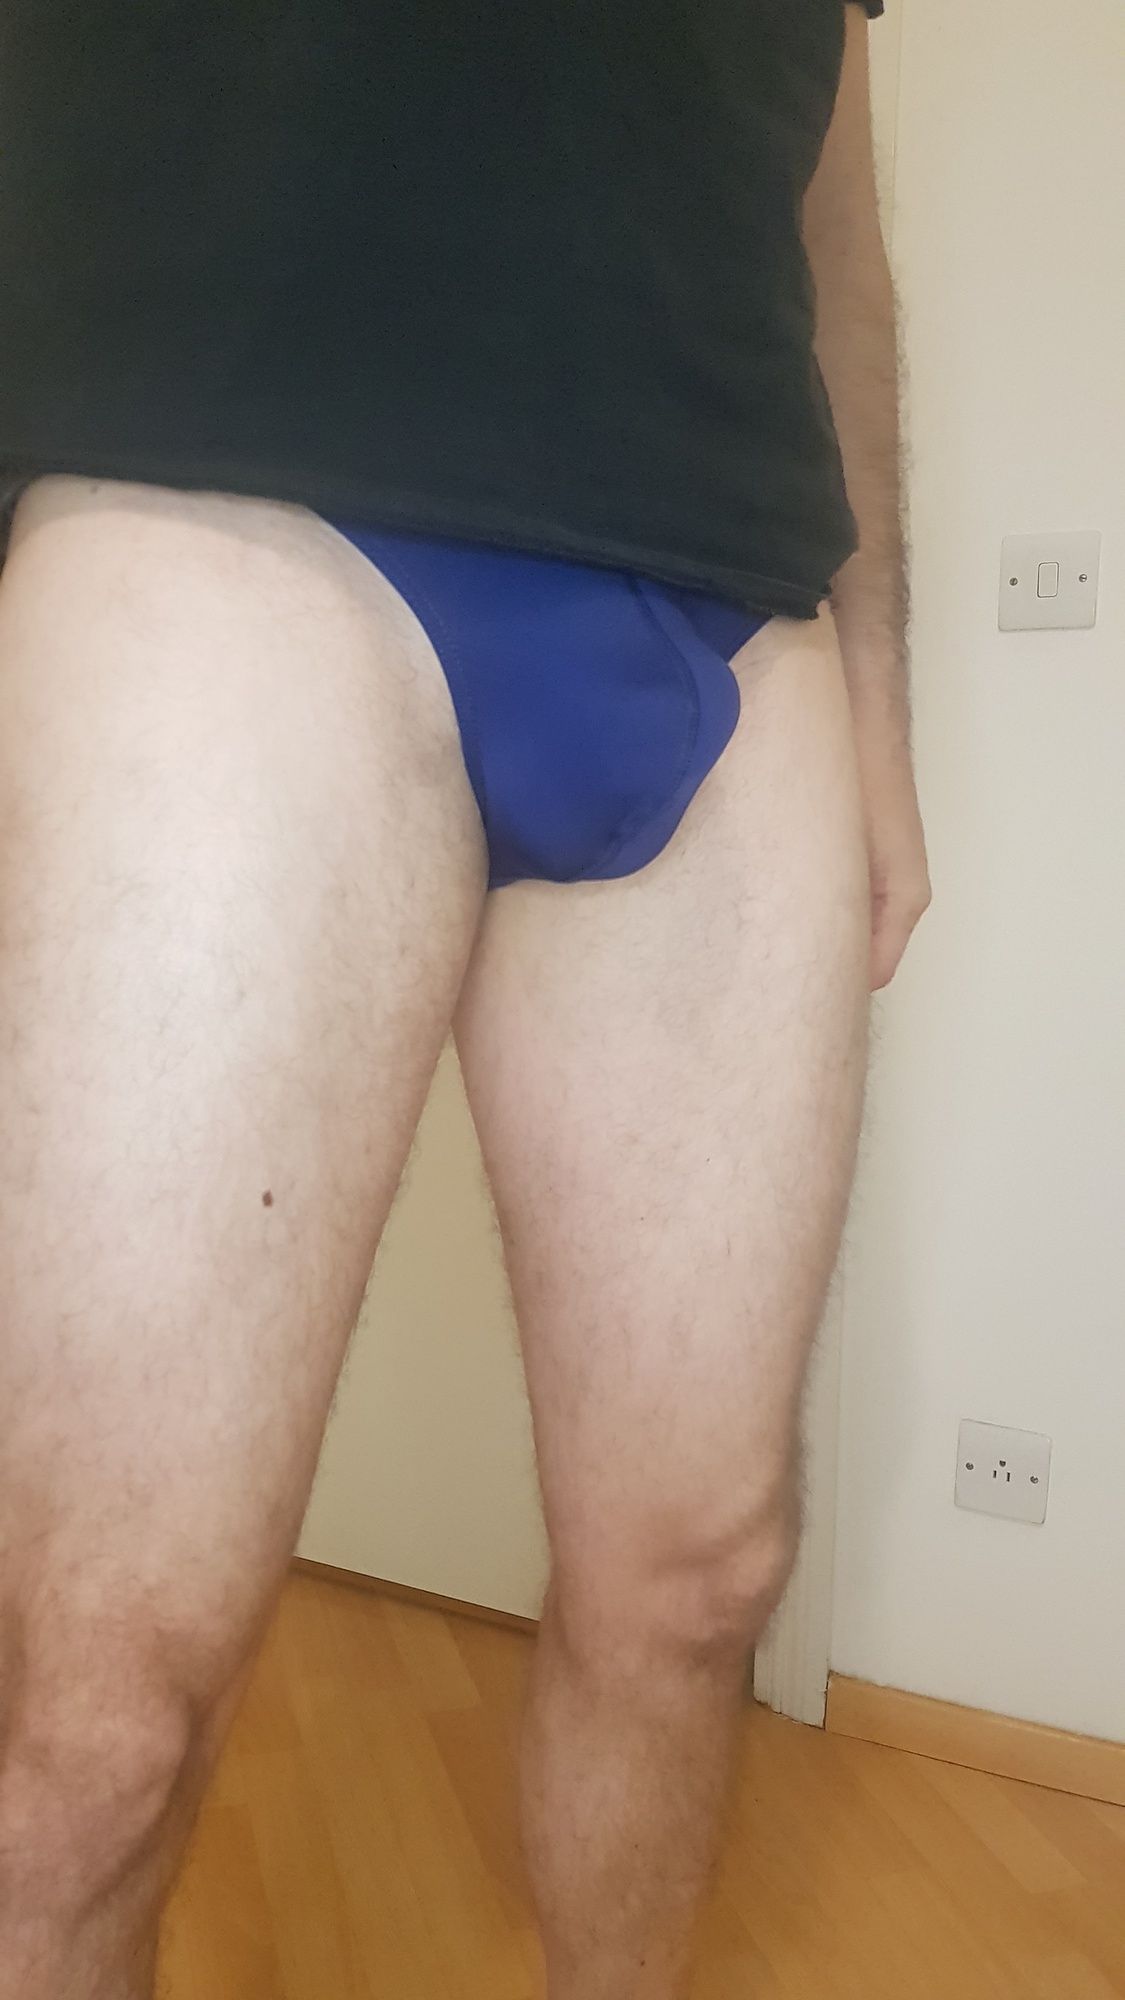 Should i go to pool in this speedos?